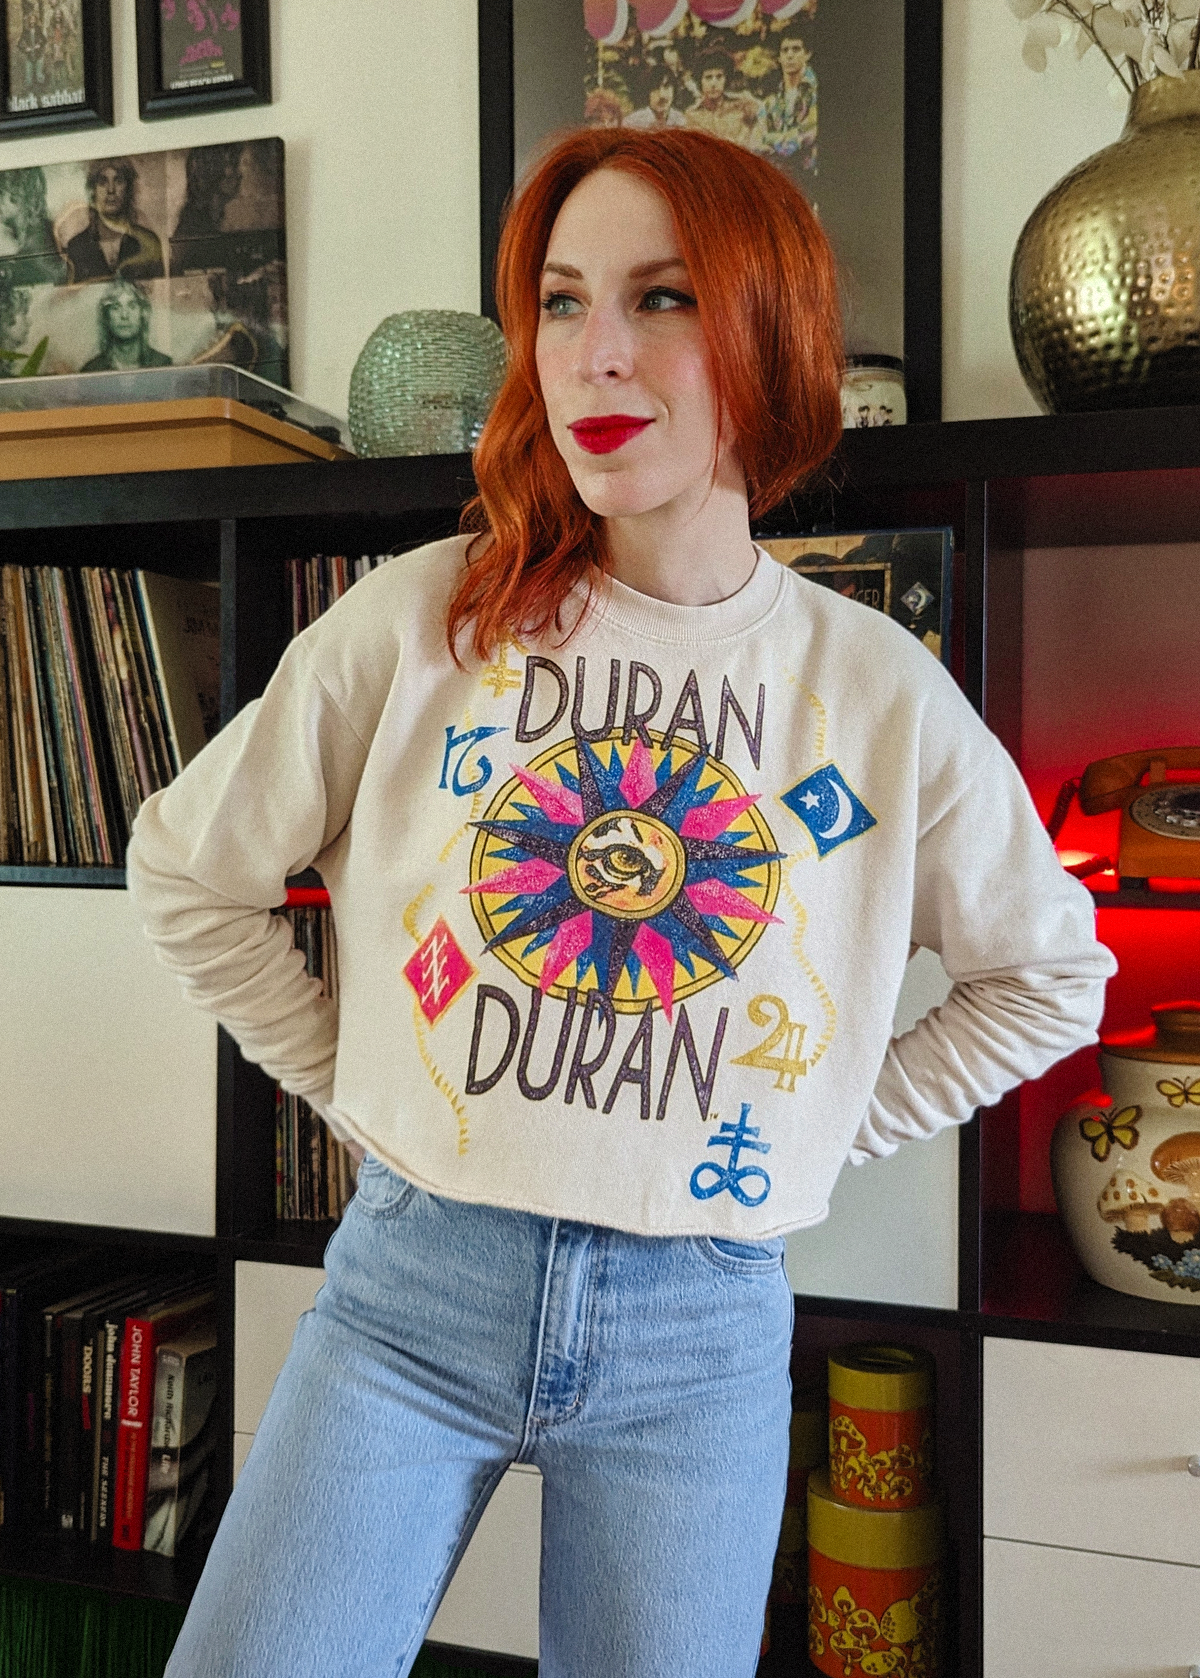 Duran Duran Ragged Tiger Crop Sweatshirt 1984 by Daydreamer LA. Officially Licensed and made in the USA